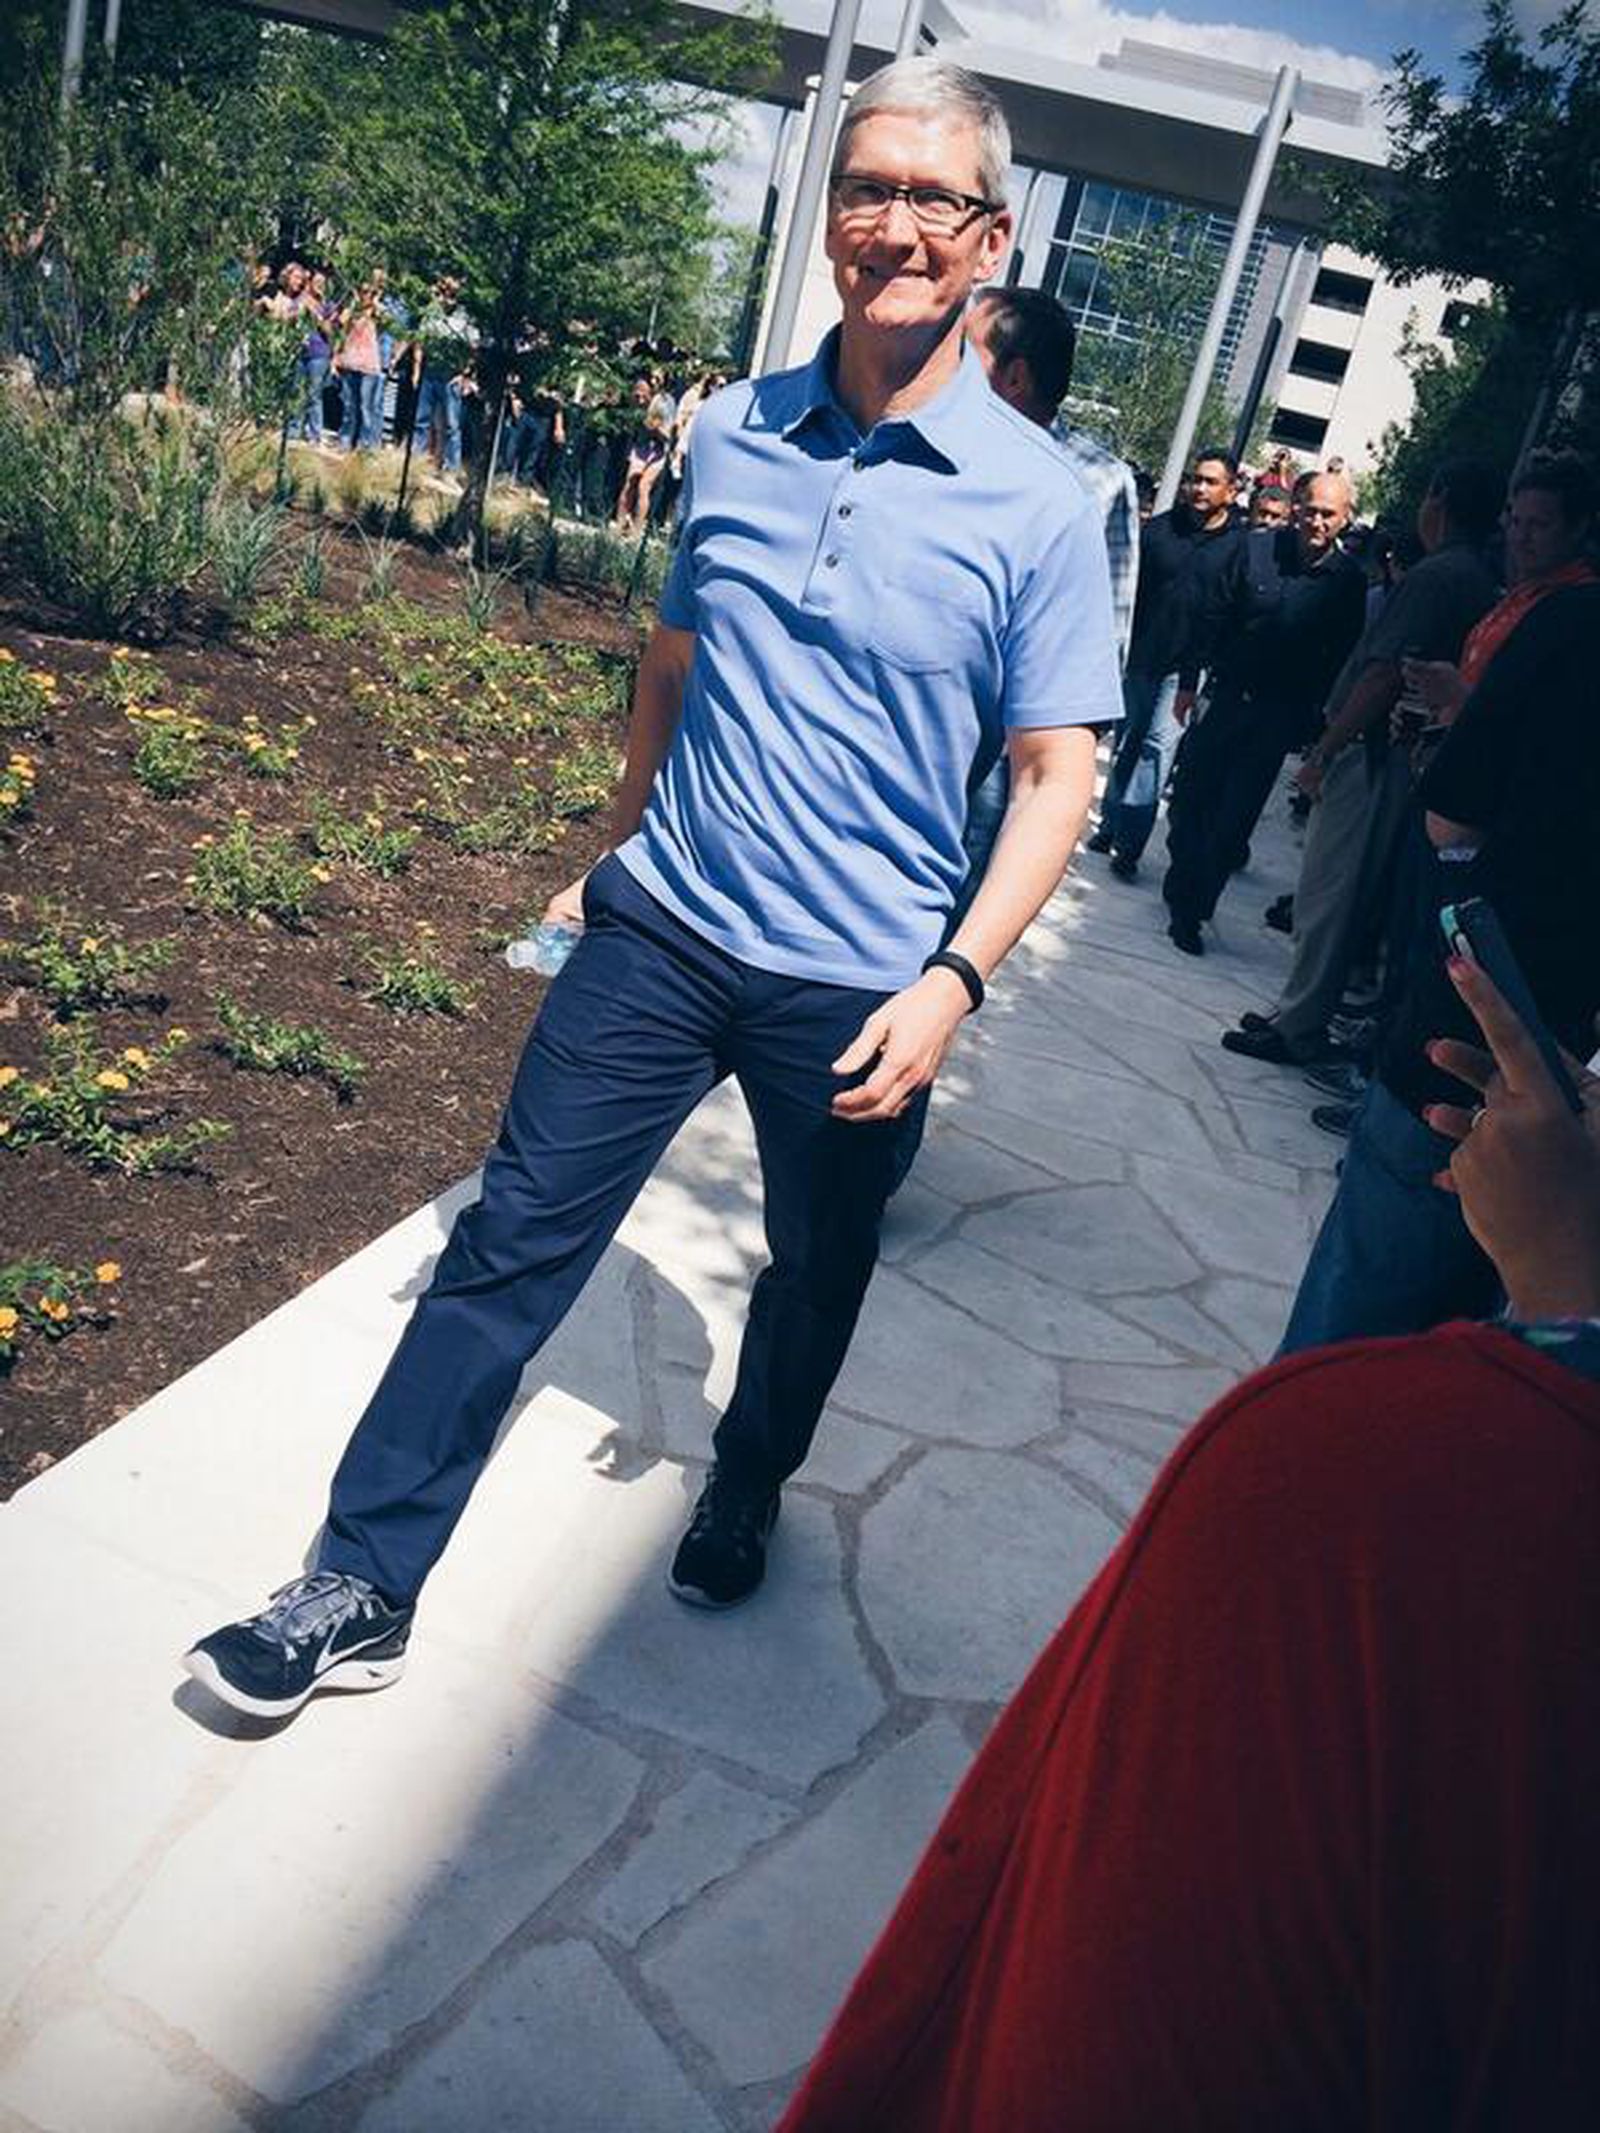 Tim Cook Visits New Campus, Says 'Exciting' Products Coming - MacRumors